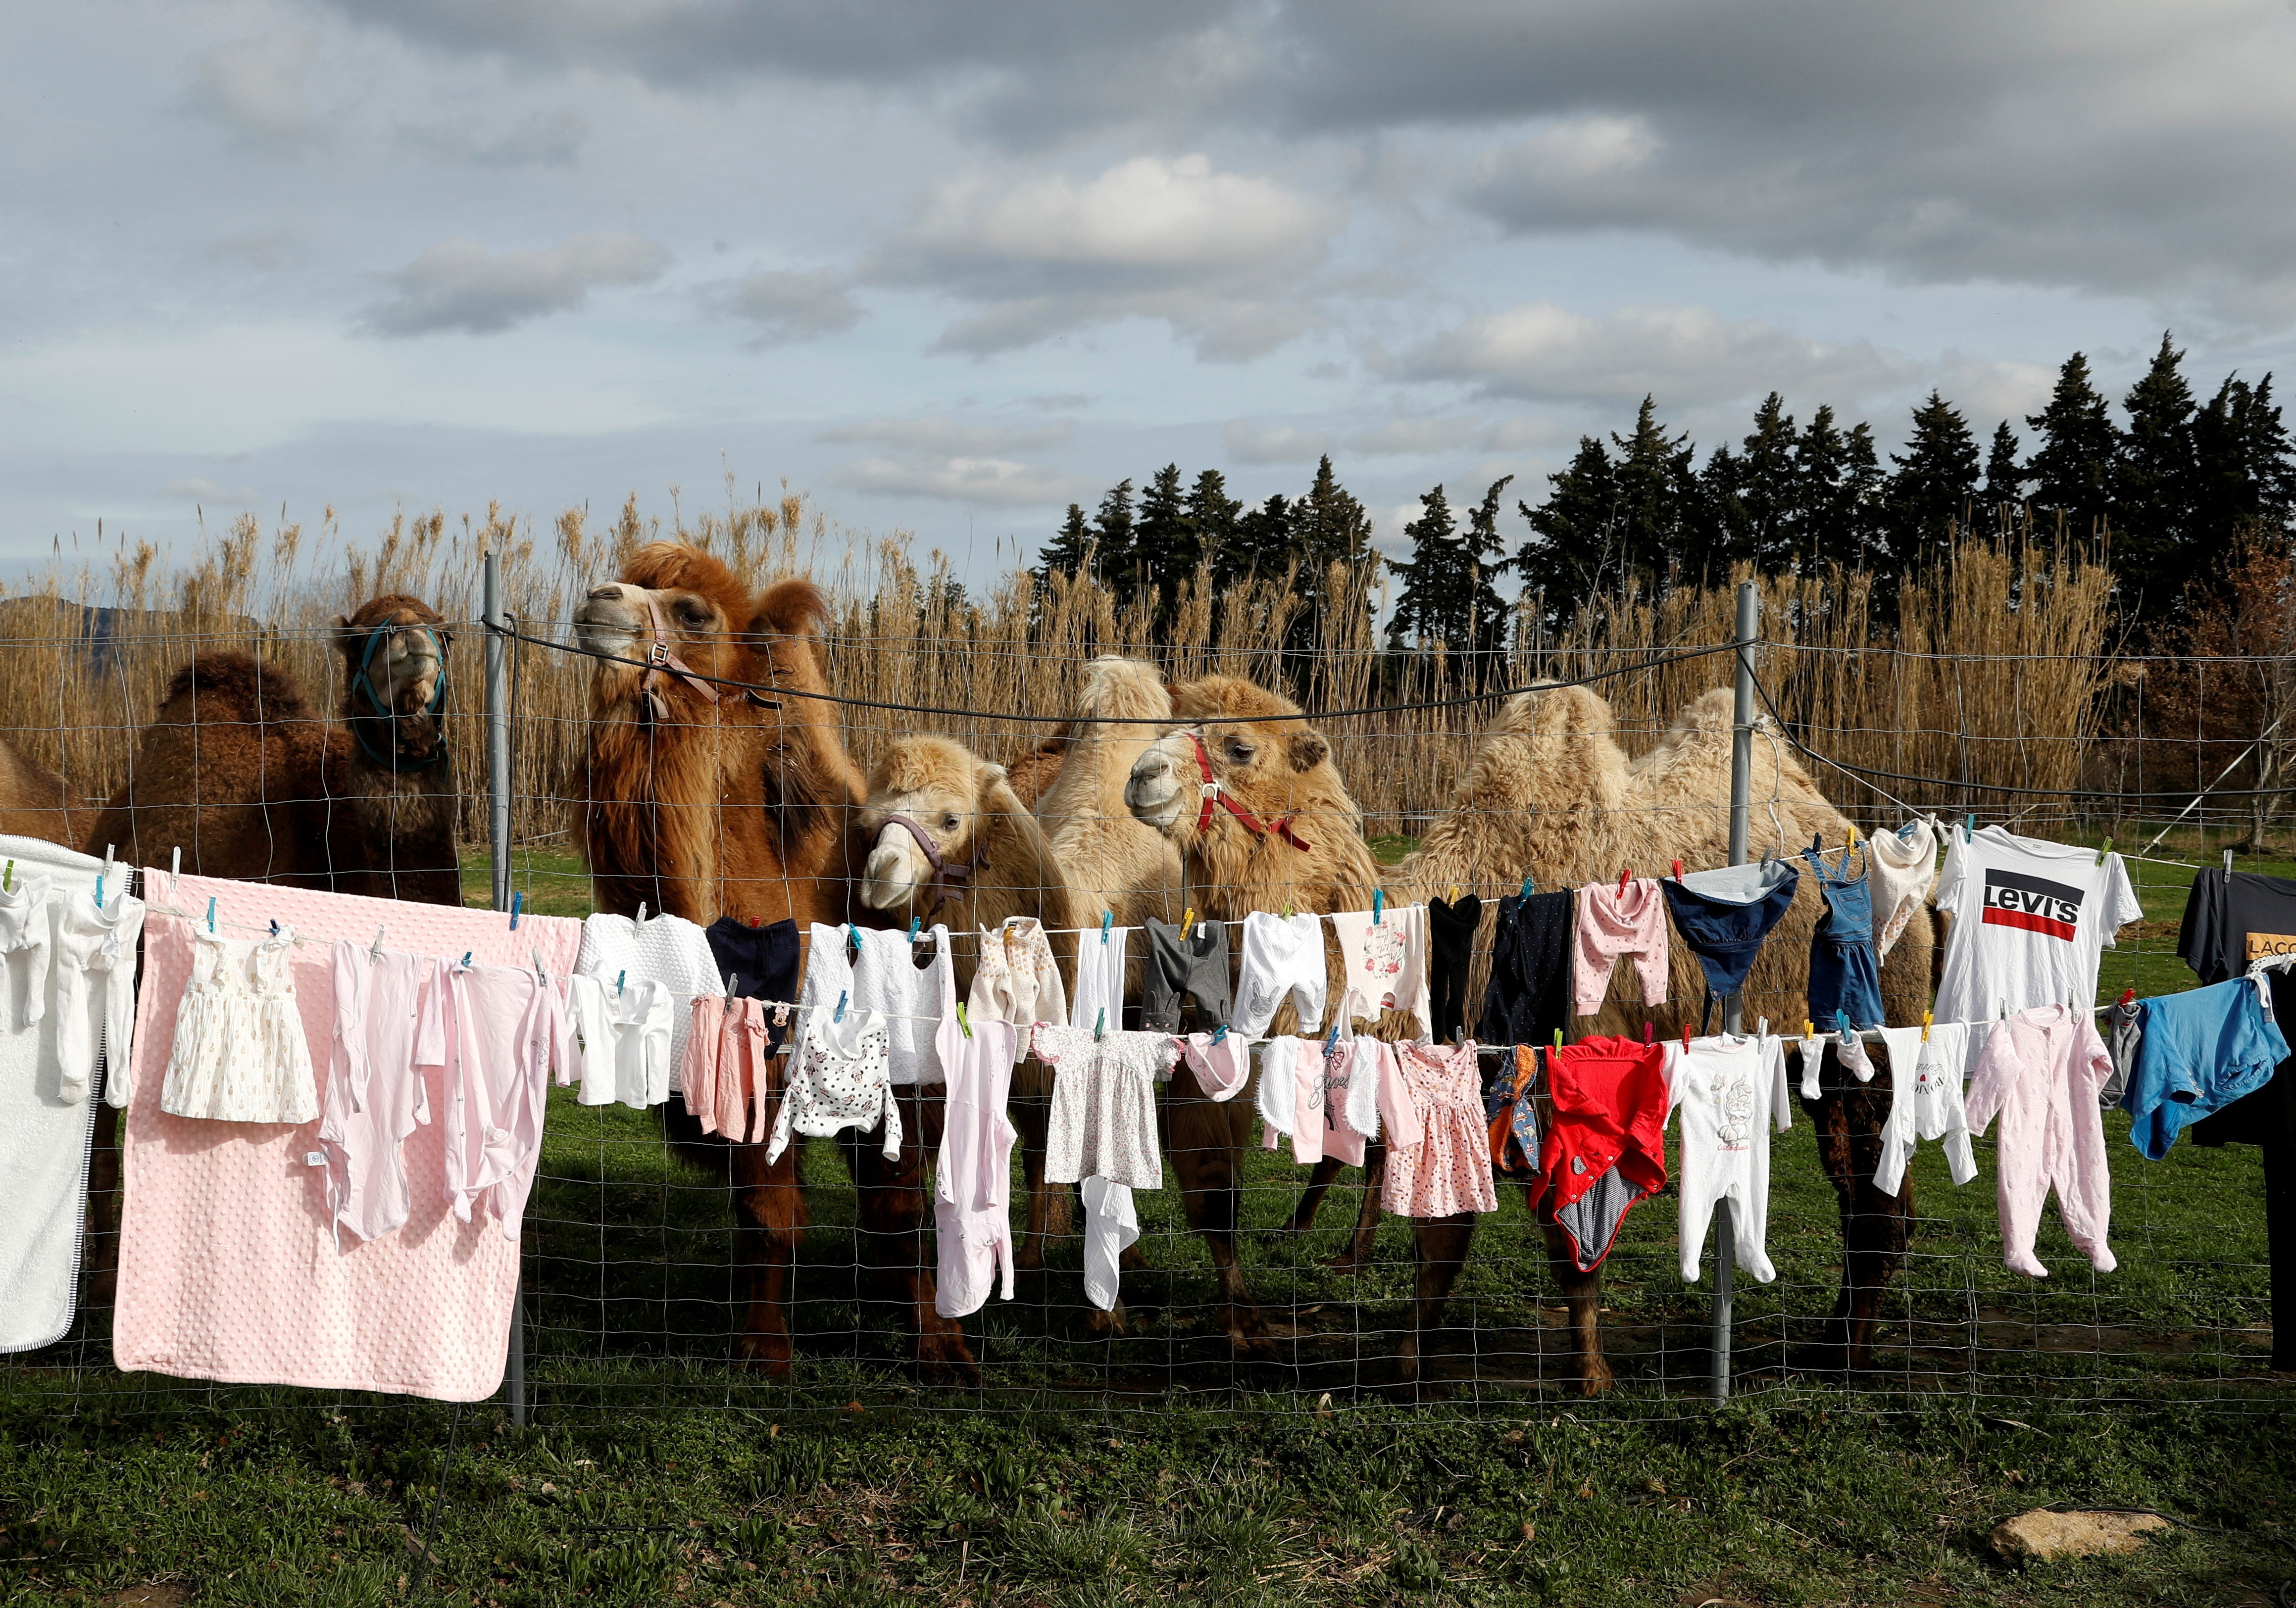 Royal Circus camels stand behind laundry in Senas, France as circus shows remained shut due Covid restrictions